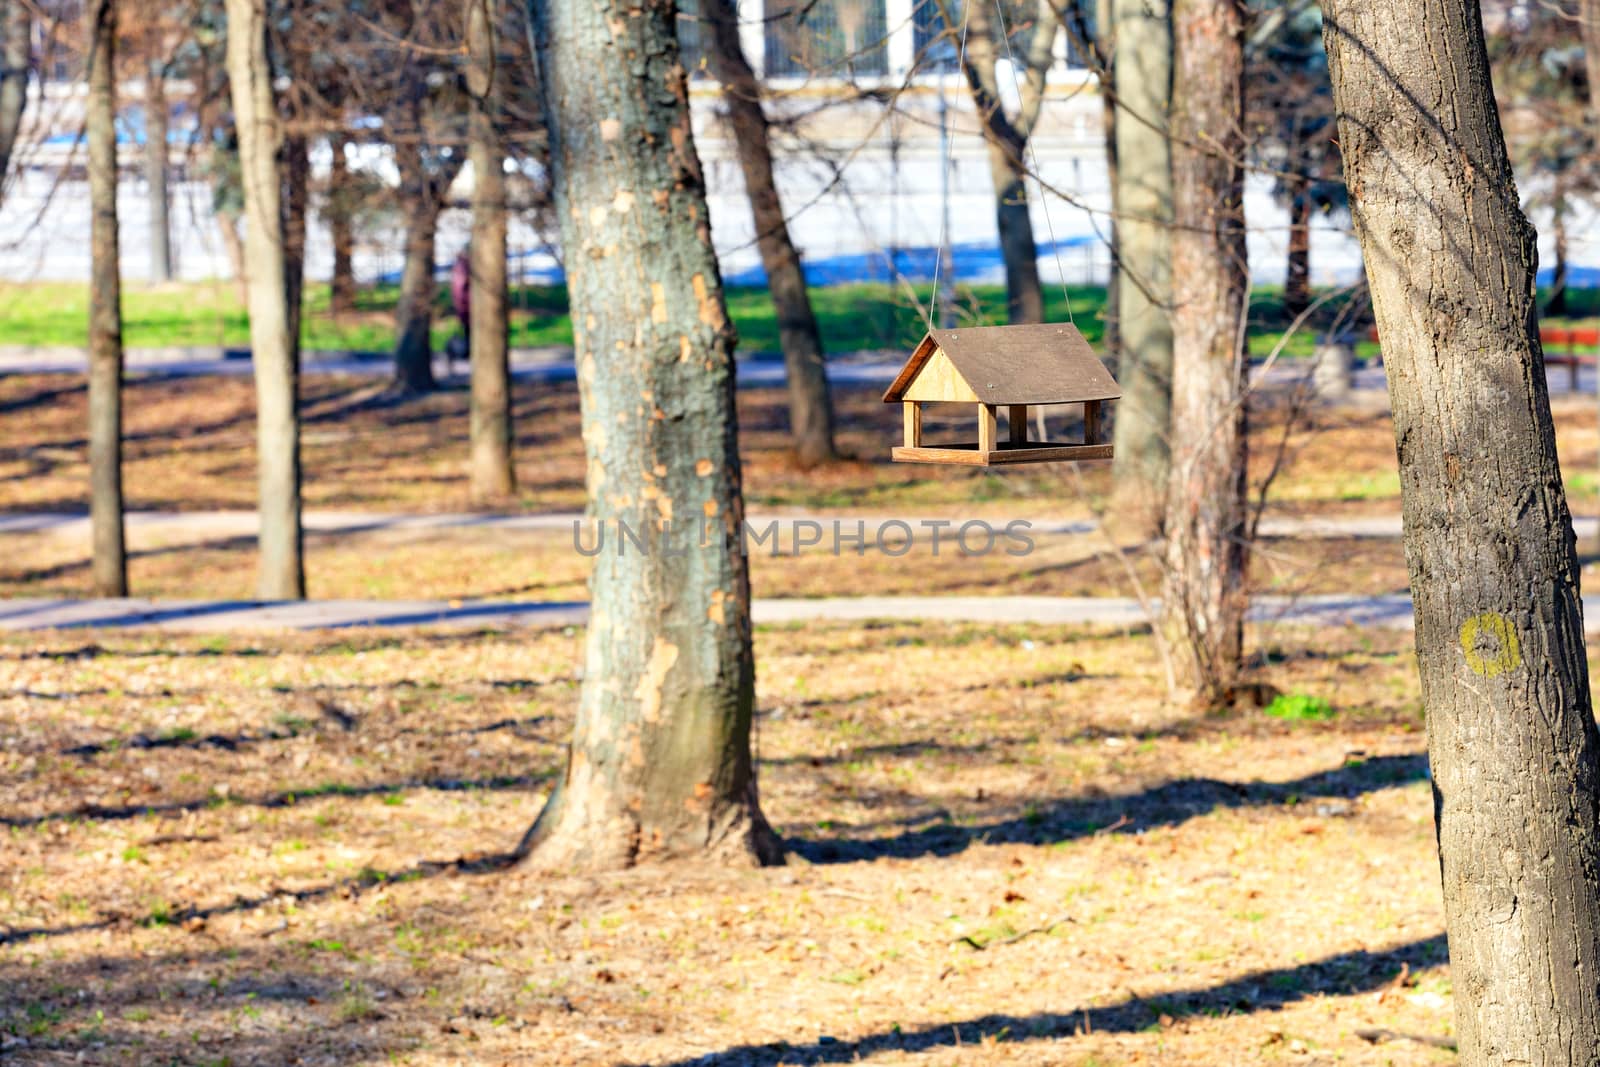 A wooden old bird feeder is suspended on a tree in the background of a spring city park in blur and bright sunlight.